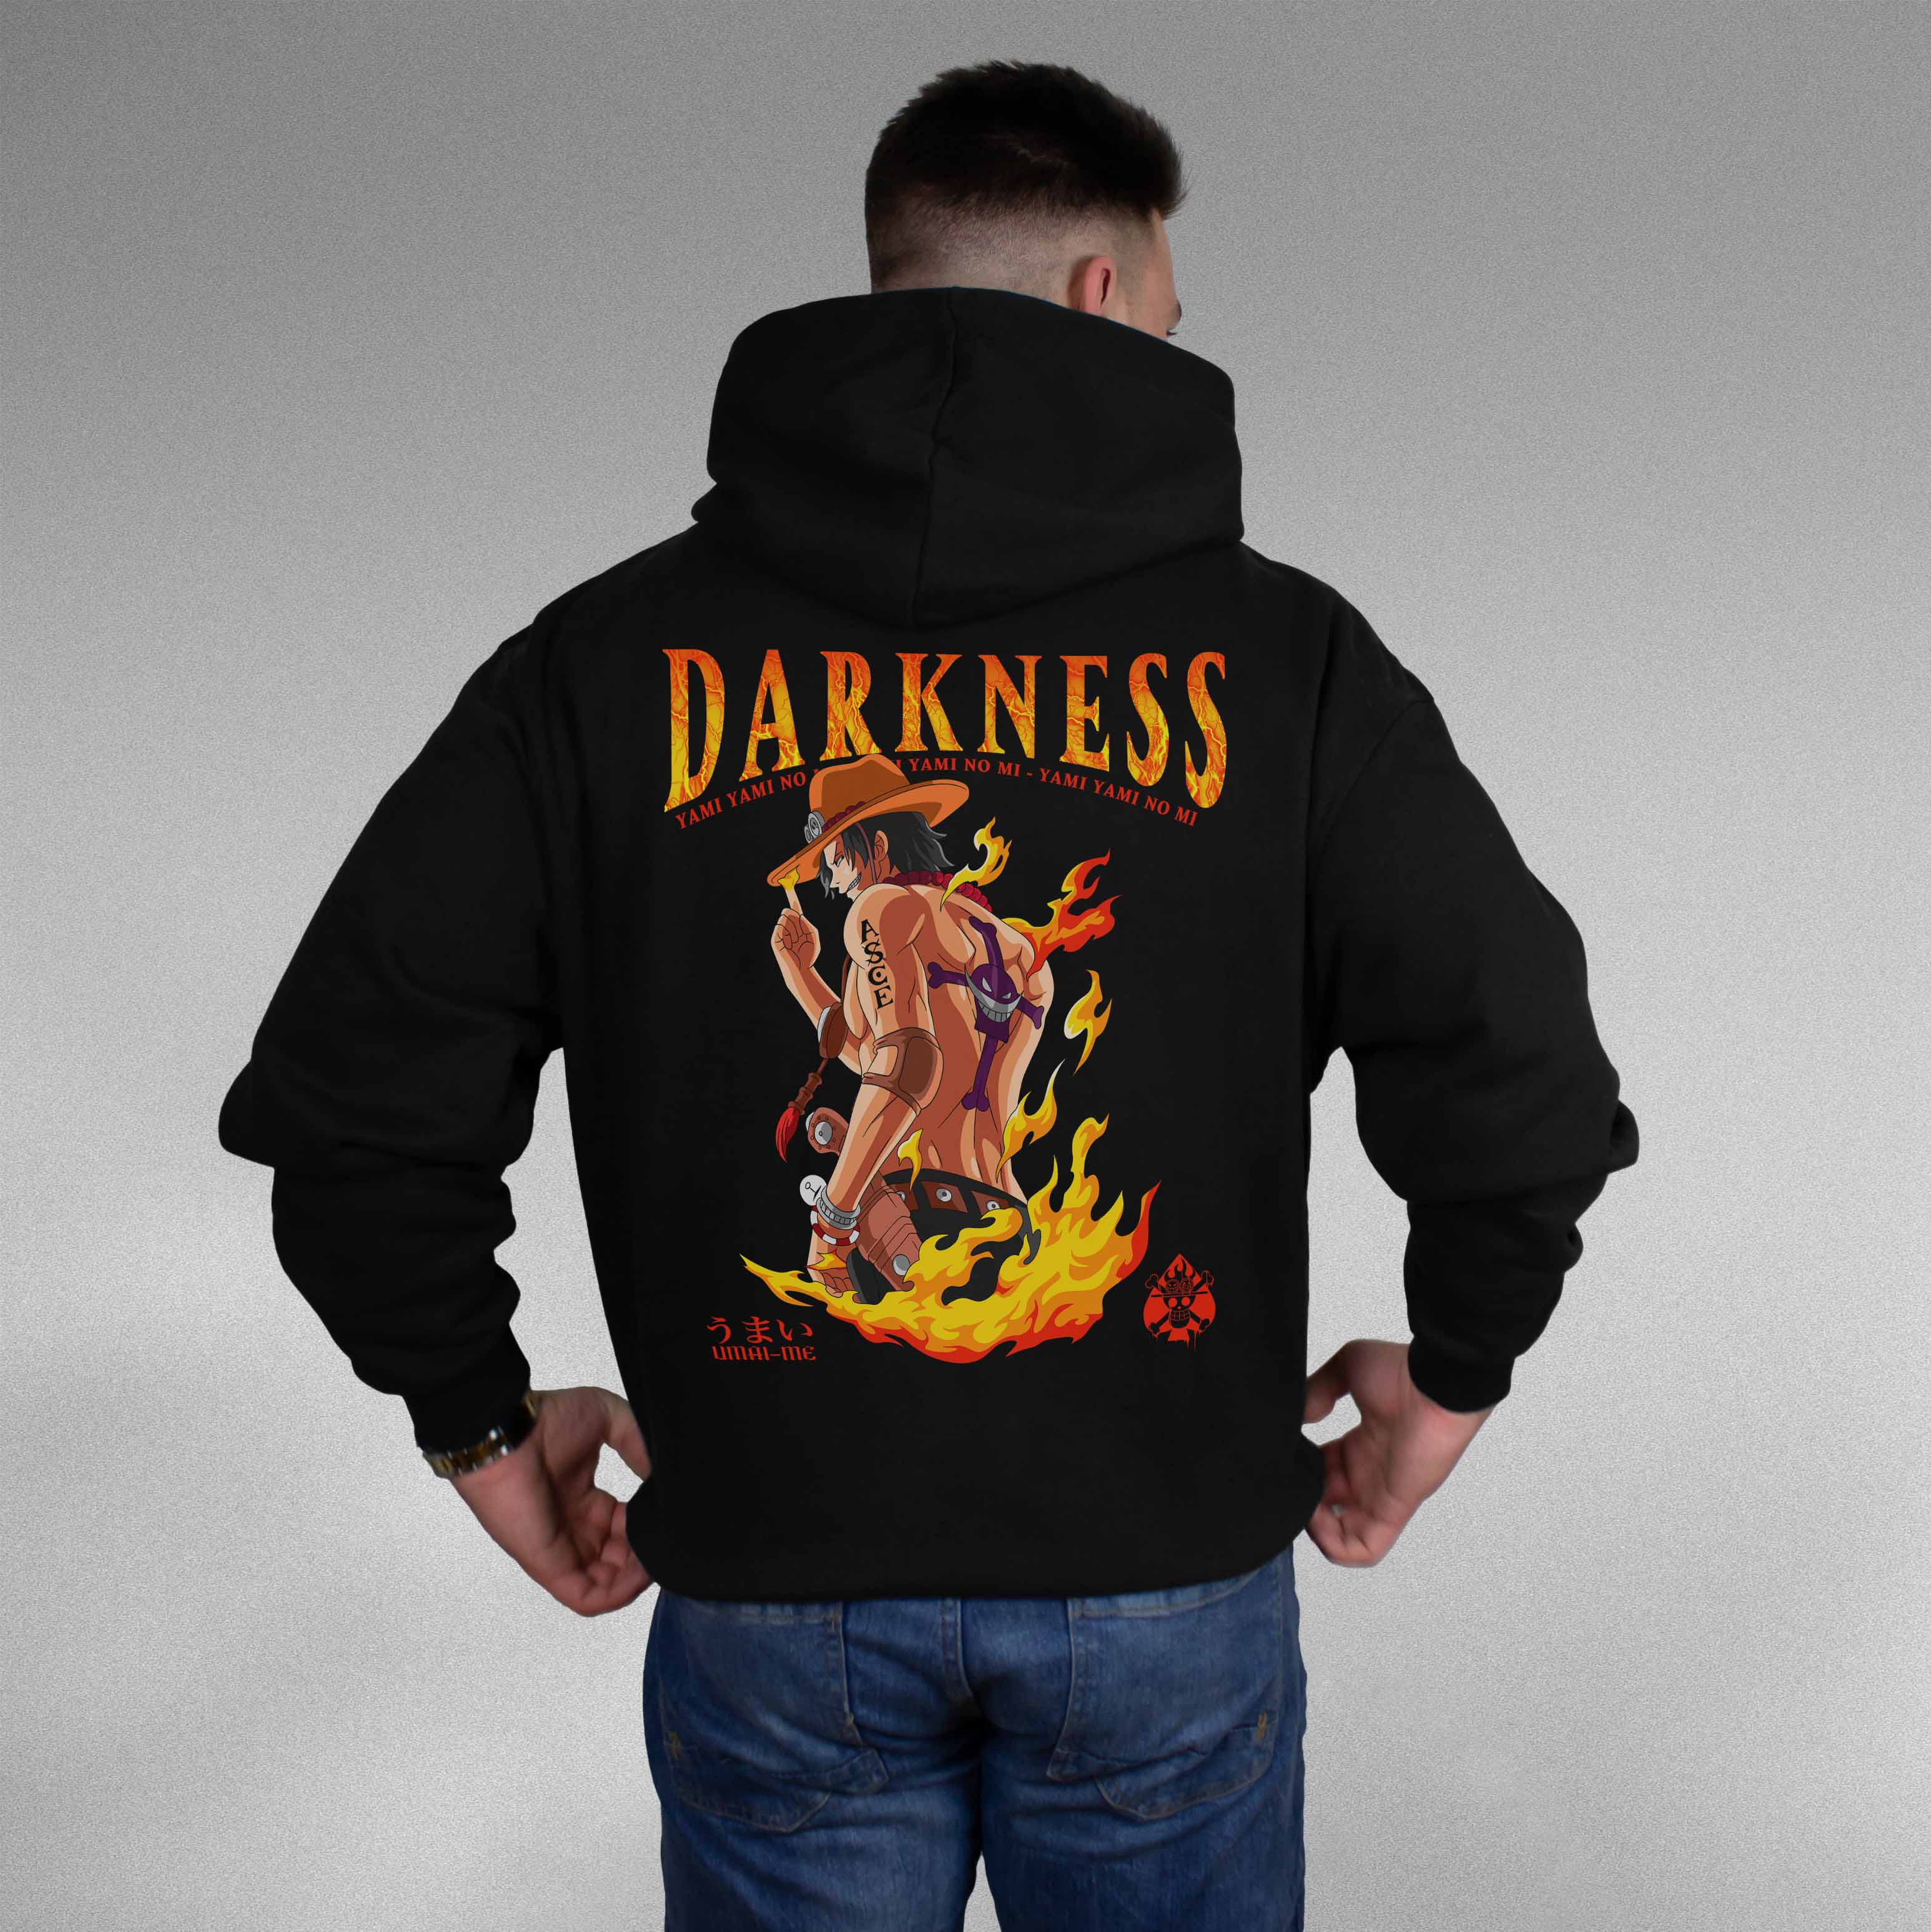 Portgas D. Ace Darkness X Gym V6 - Heavy Cotton Oversize Hoodie